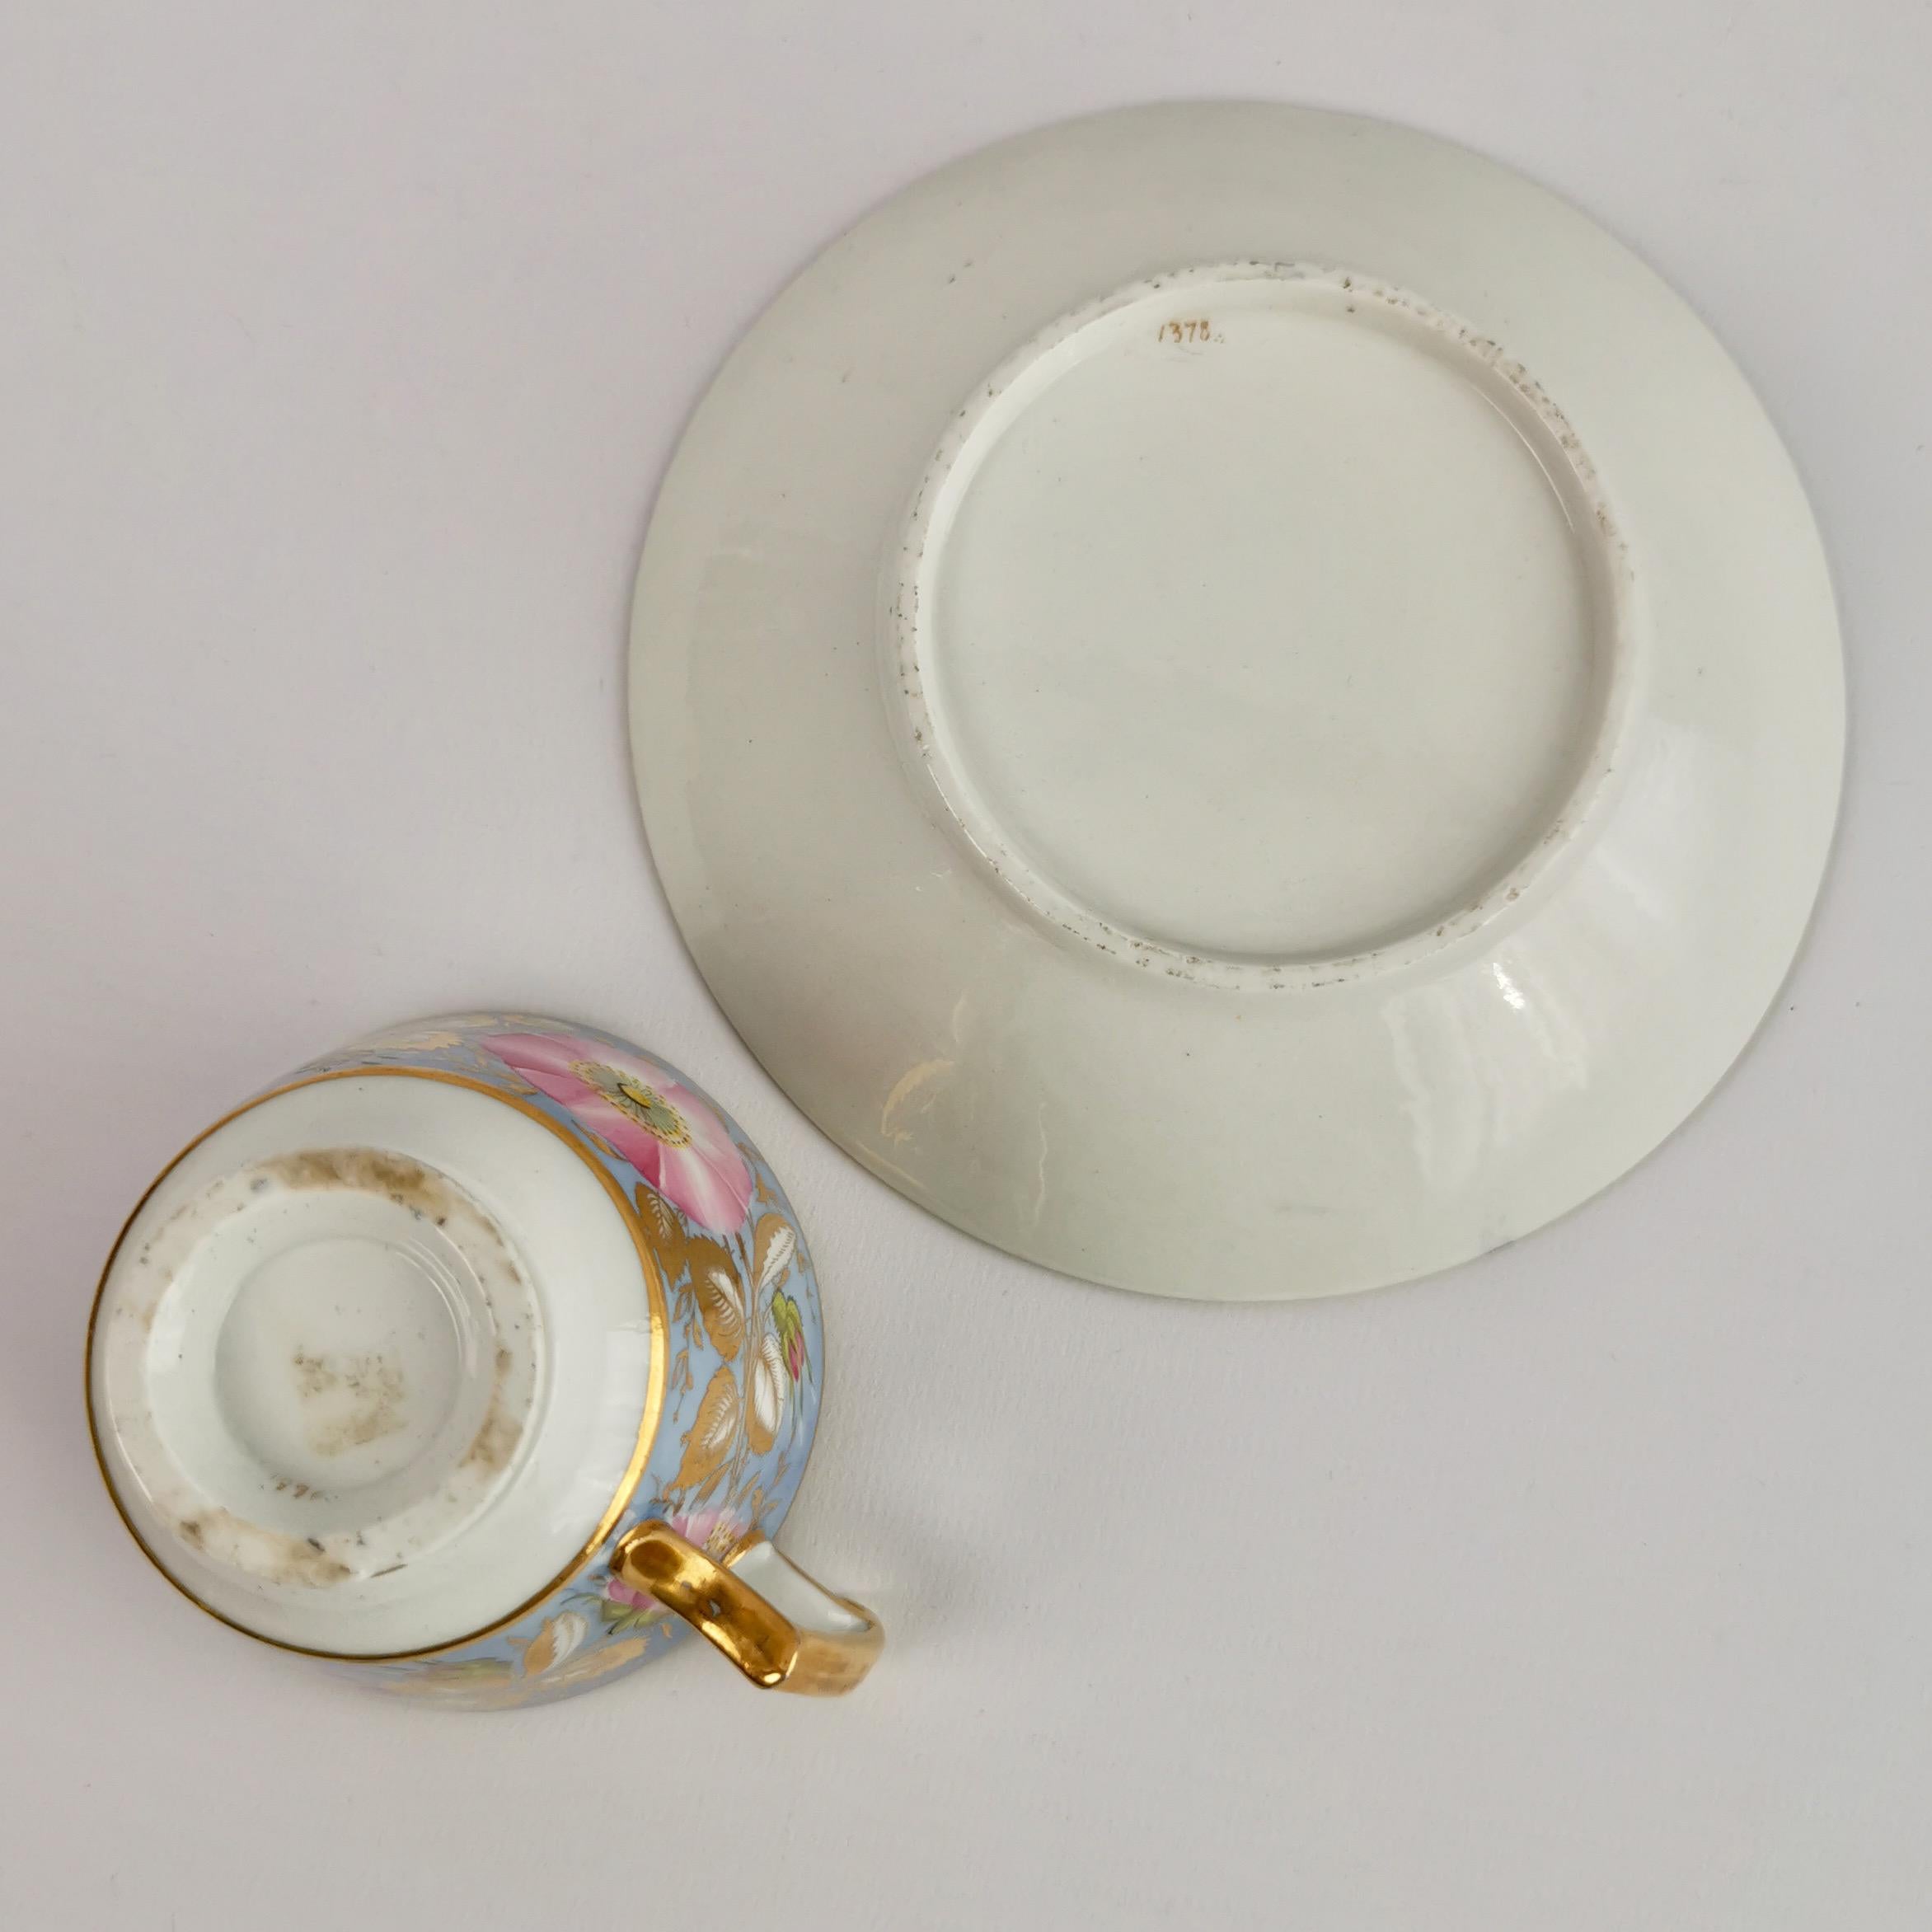 Anstice Horton & Rose Coffee Cup, Periwinkle and Pink Roses, Regency ca 1812 6